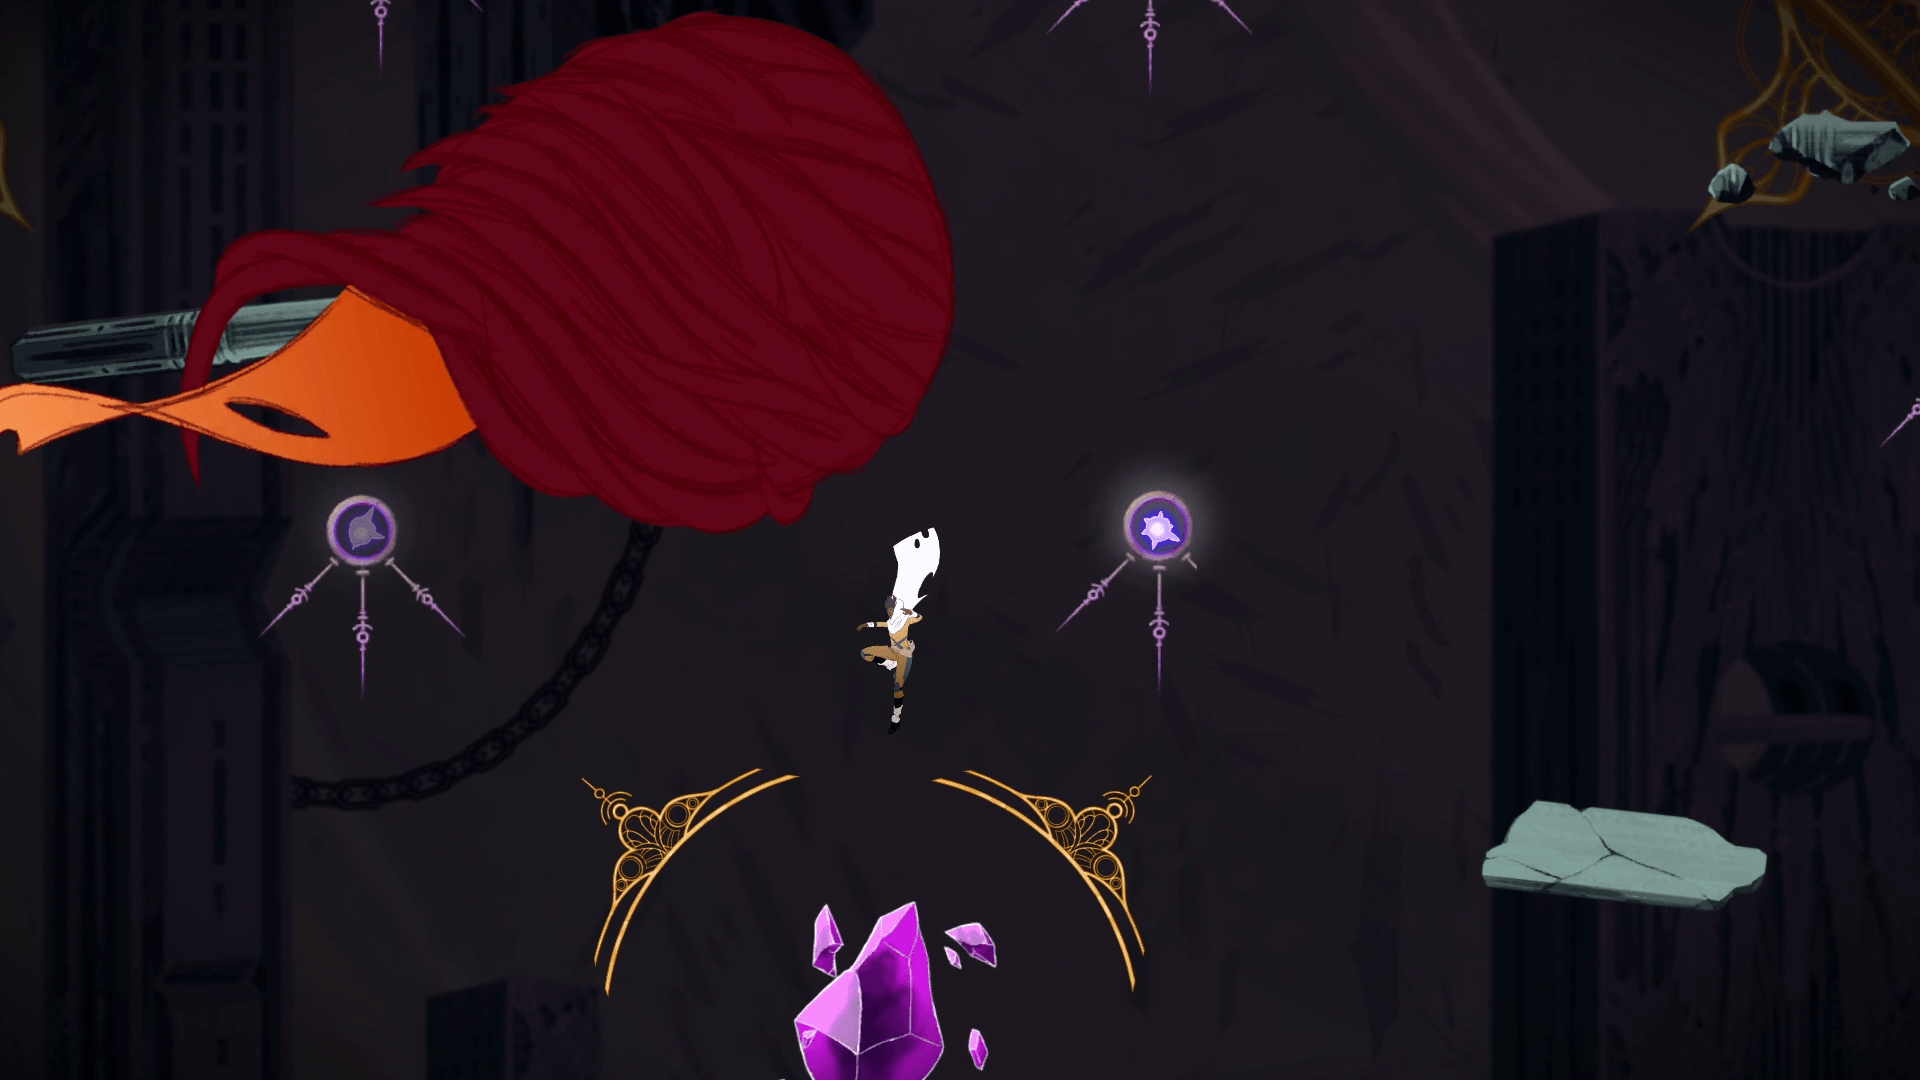 Sundered (Pc) Review - Expectations Torn Asunder(Ed) 14